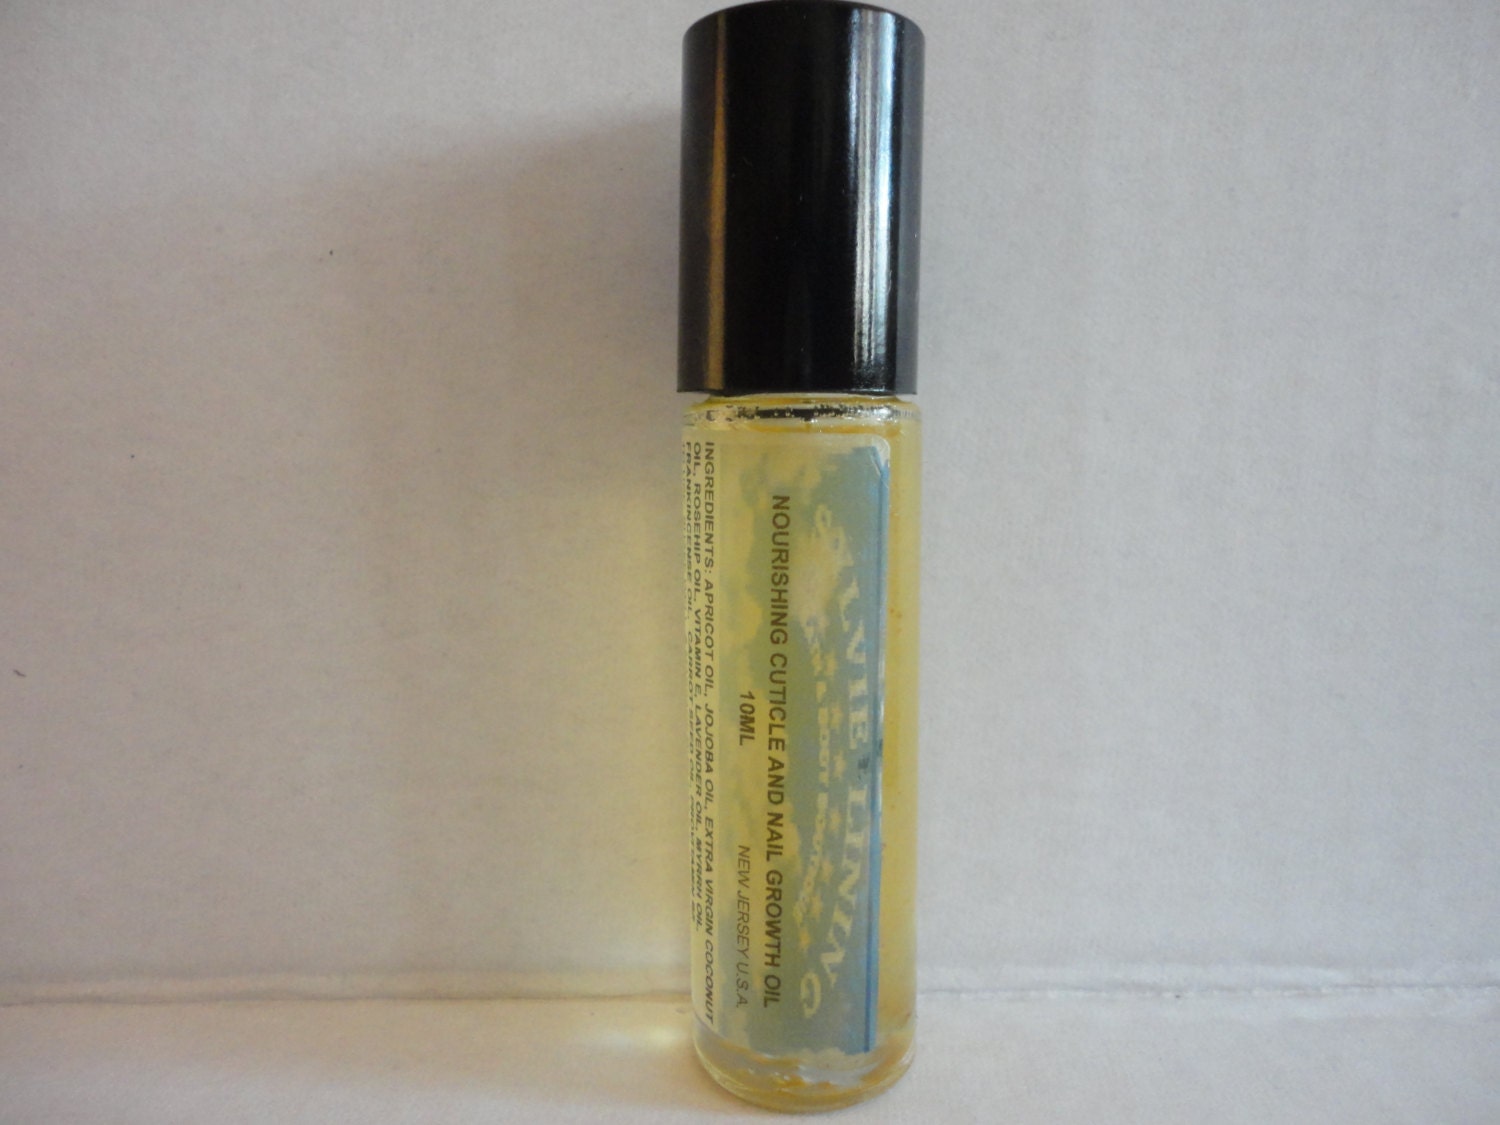 Nourishing Cuticle and Nail Growth Oil / Rollerball Nail